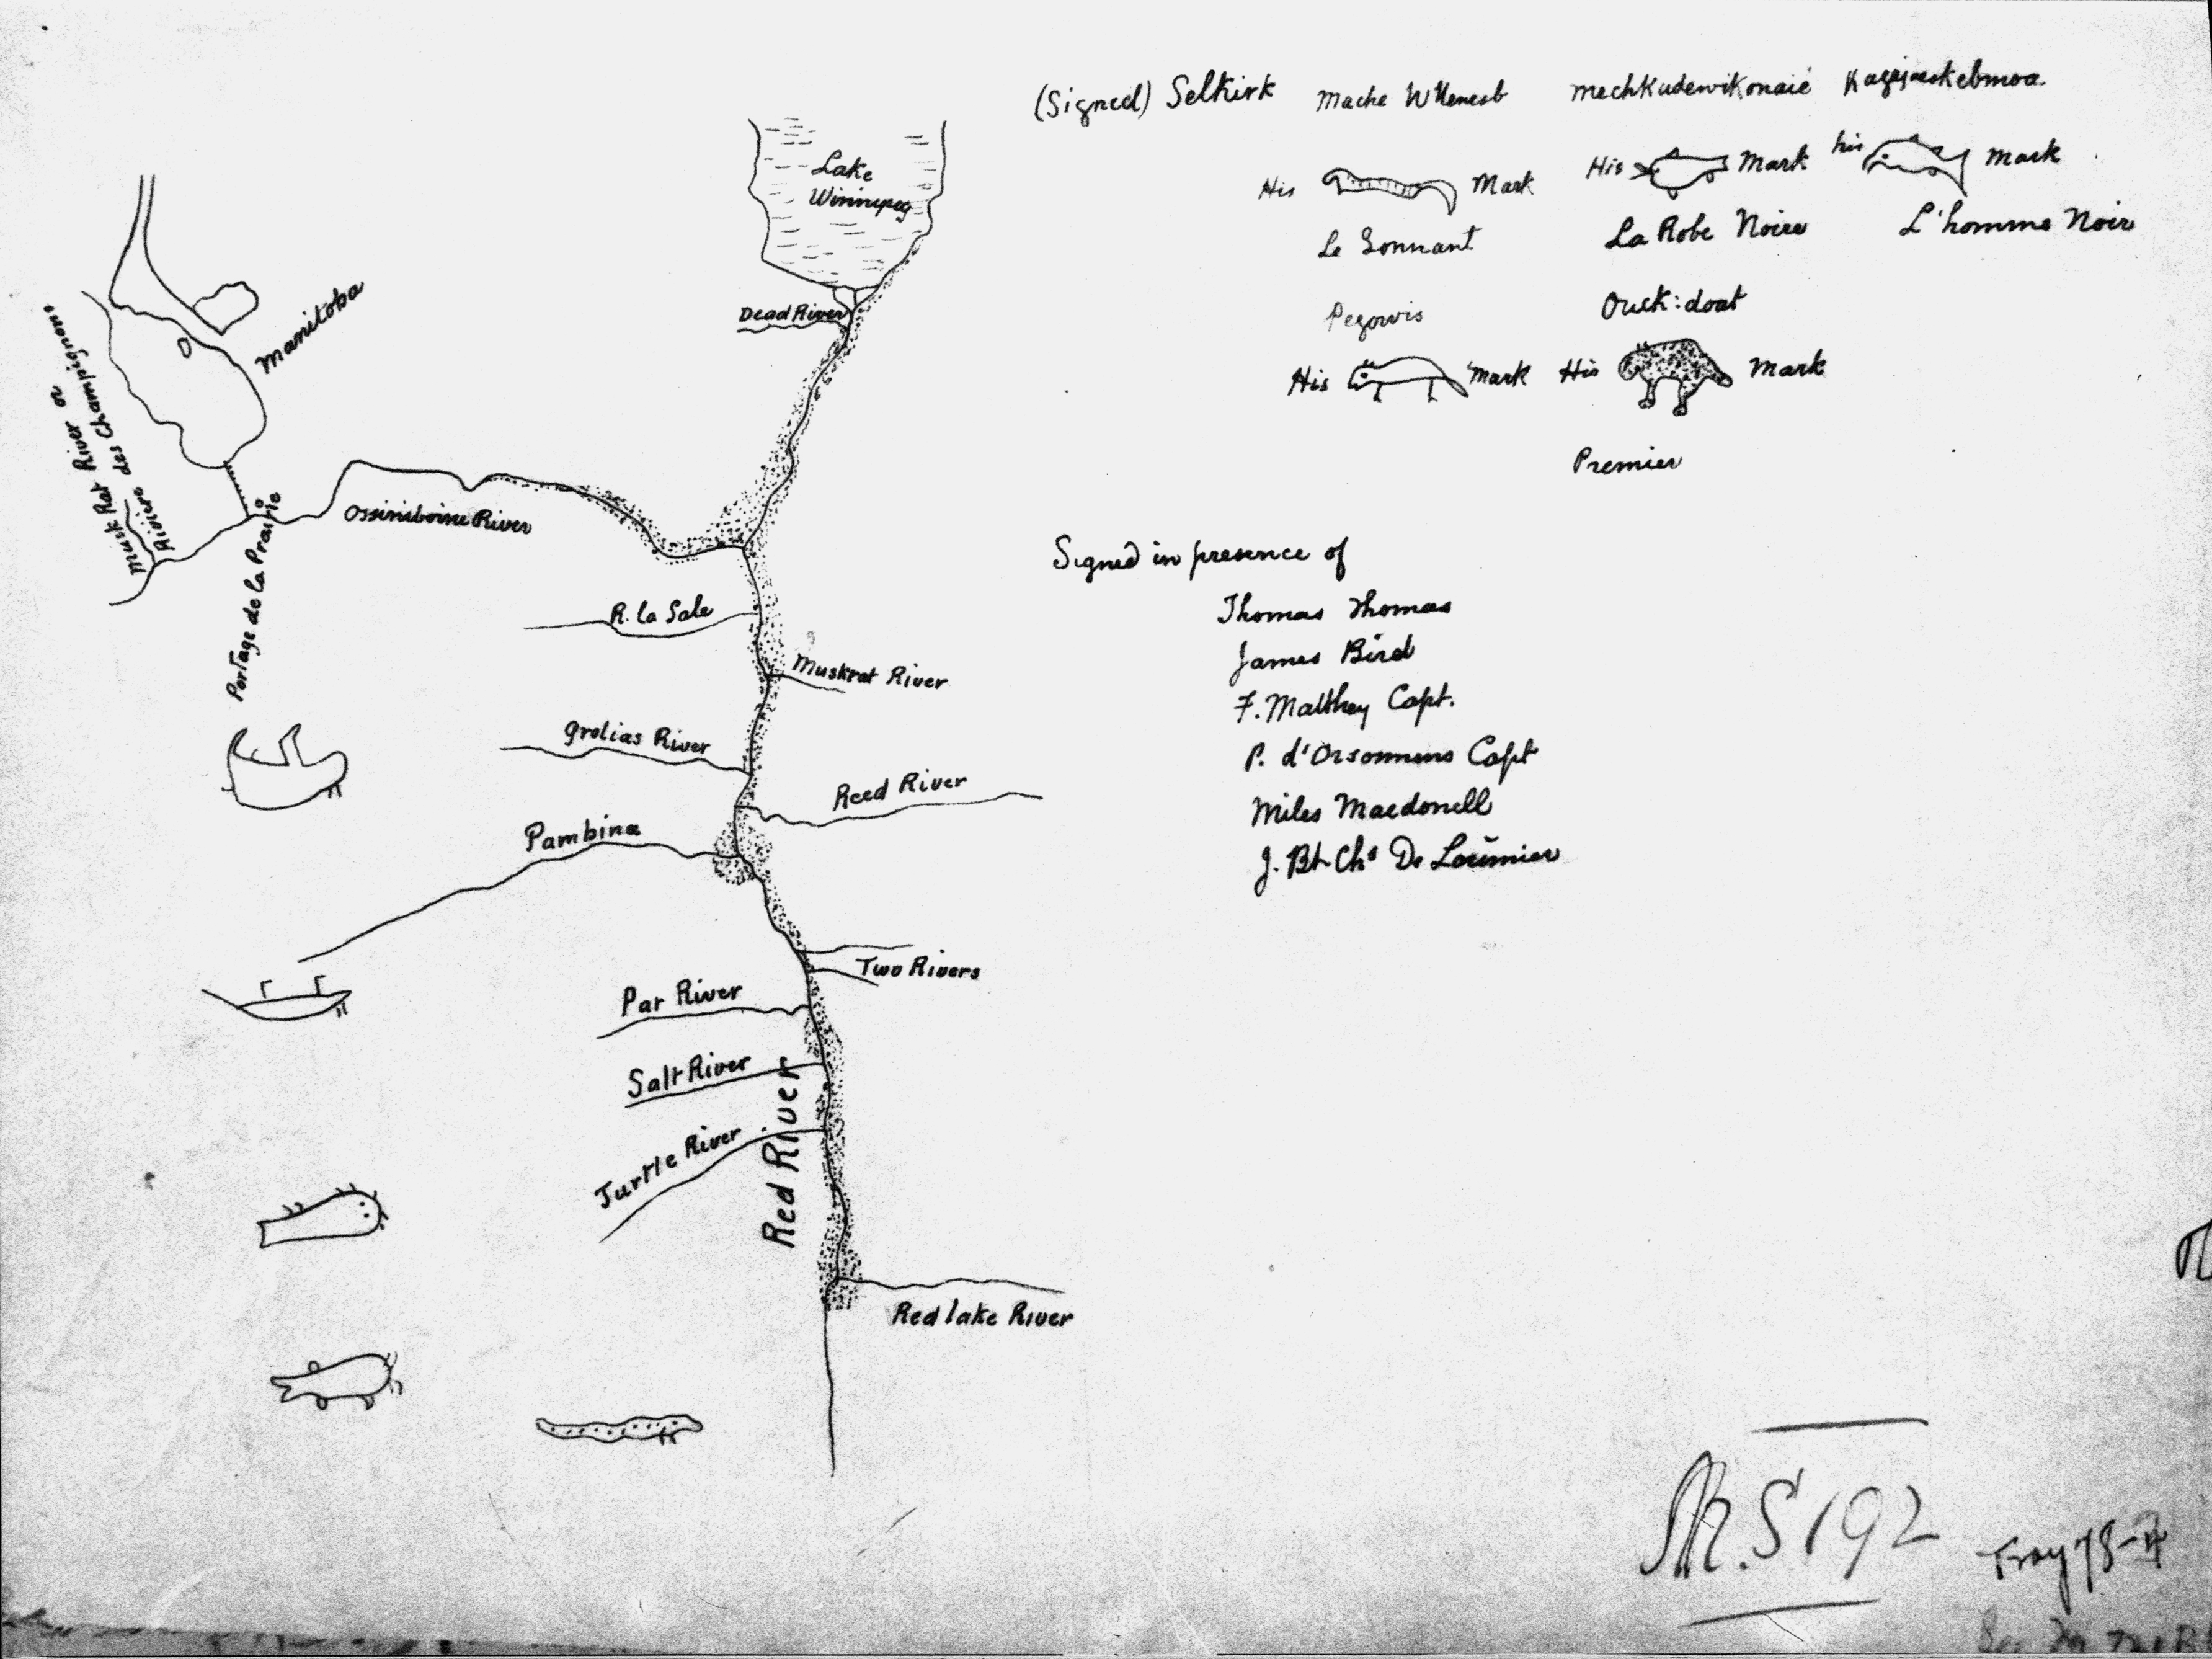 Map and signatures from the 1817 Peguis-Selkirk Treaty.